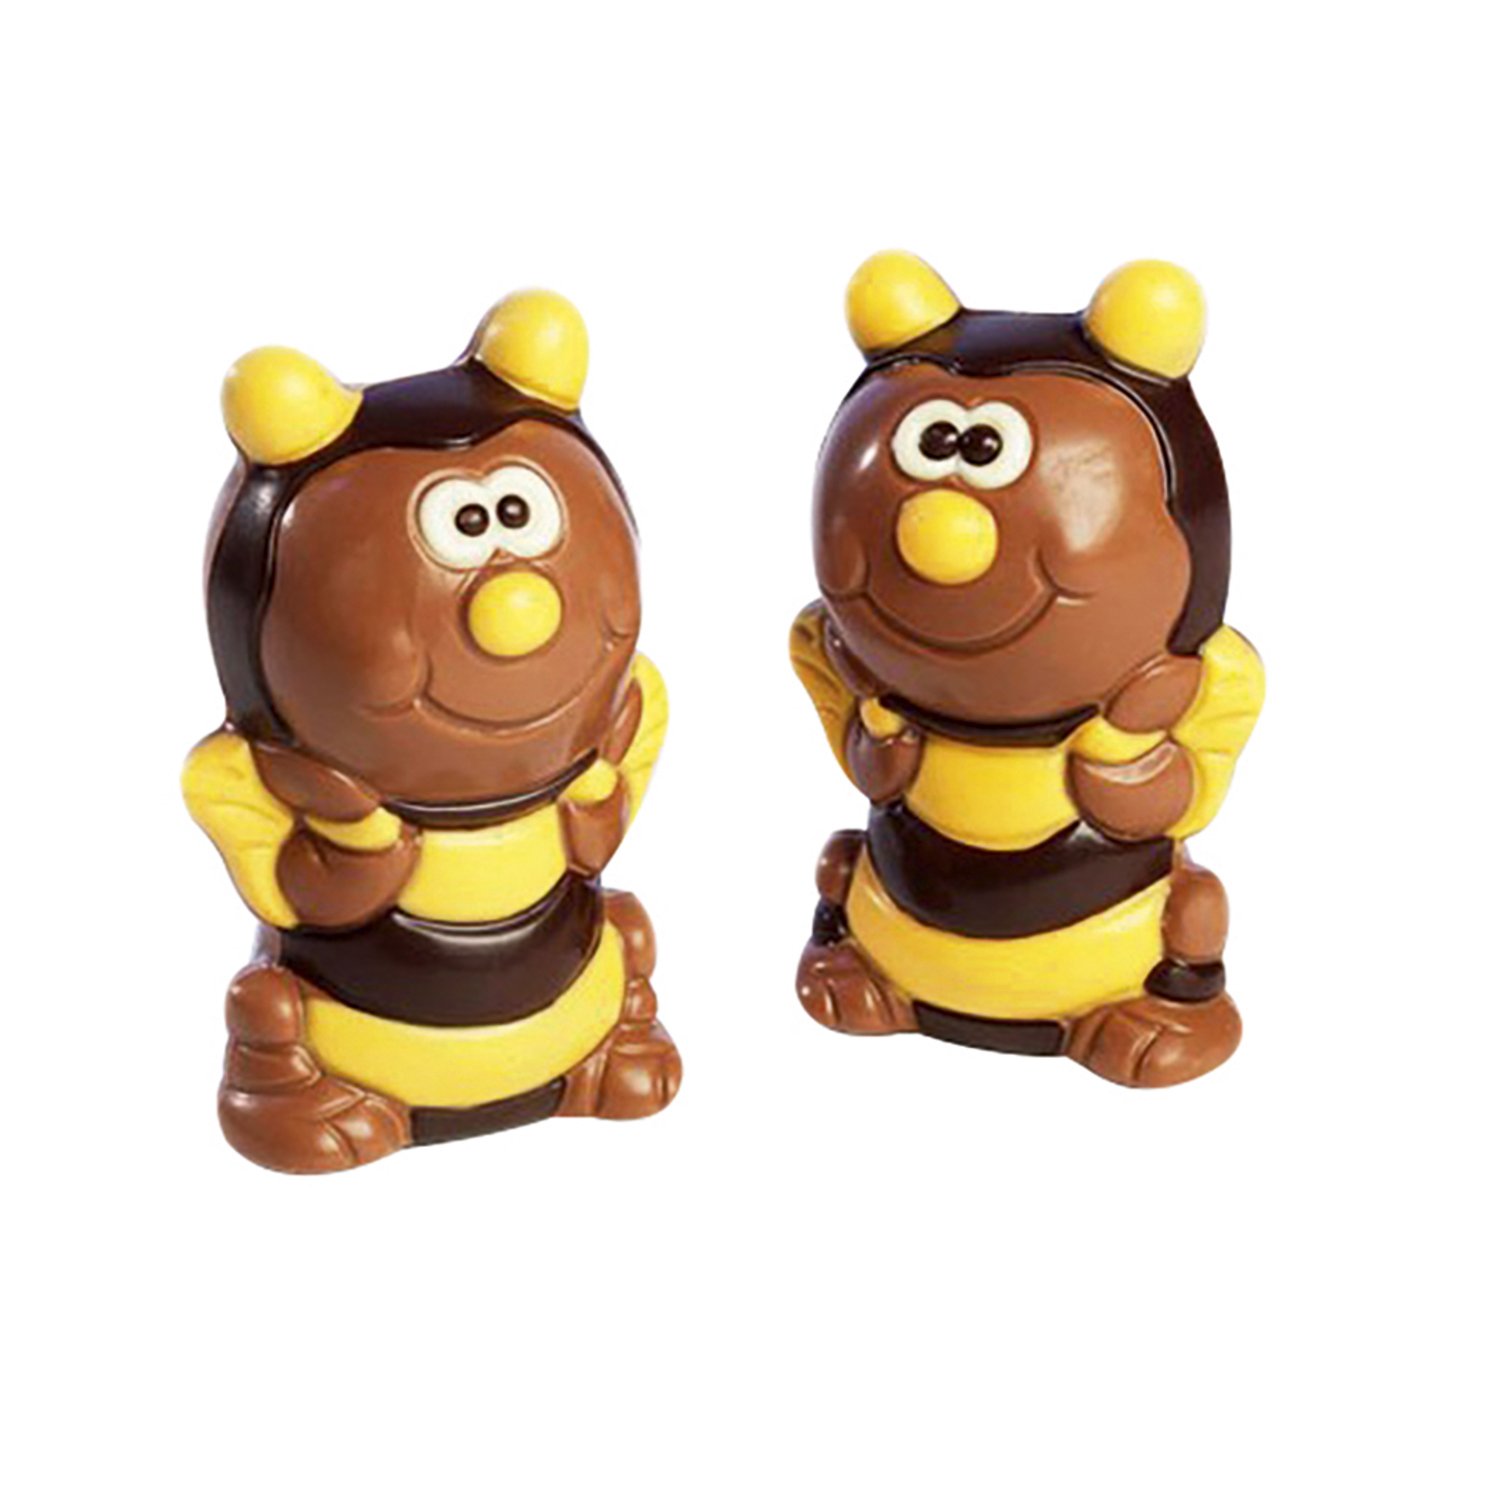 Decorated hollow milk choc bumble bee 13cm - 8x110g